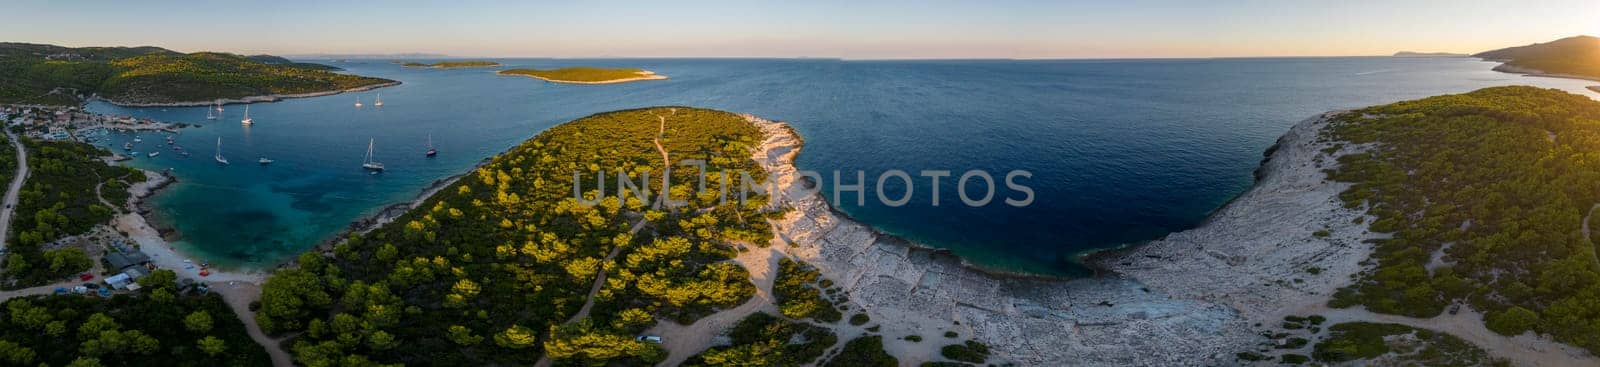 Vis Island, Italian Lissa, island of Croatia in the Adriatic Sea at sunset . It is the outermost major island of the Dalmatian archipelago panoramic aerial view landscape by AndreaIzzotti